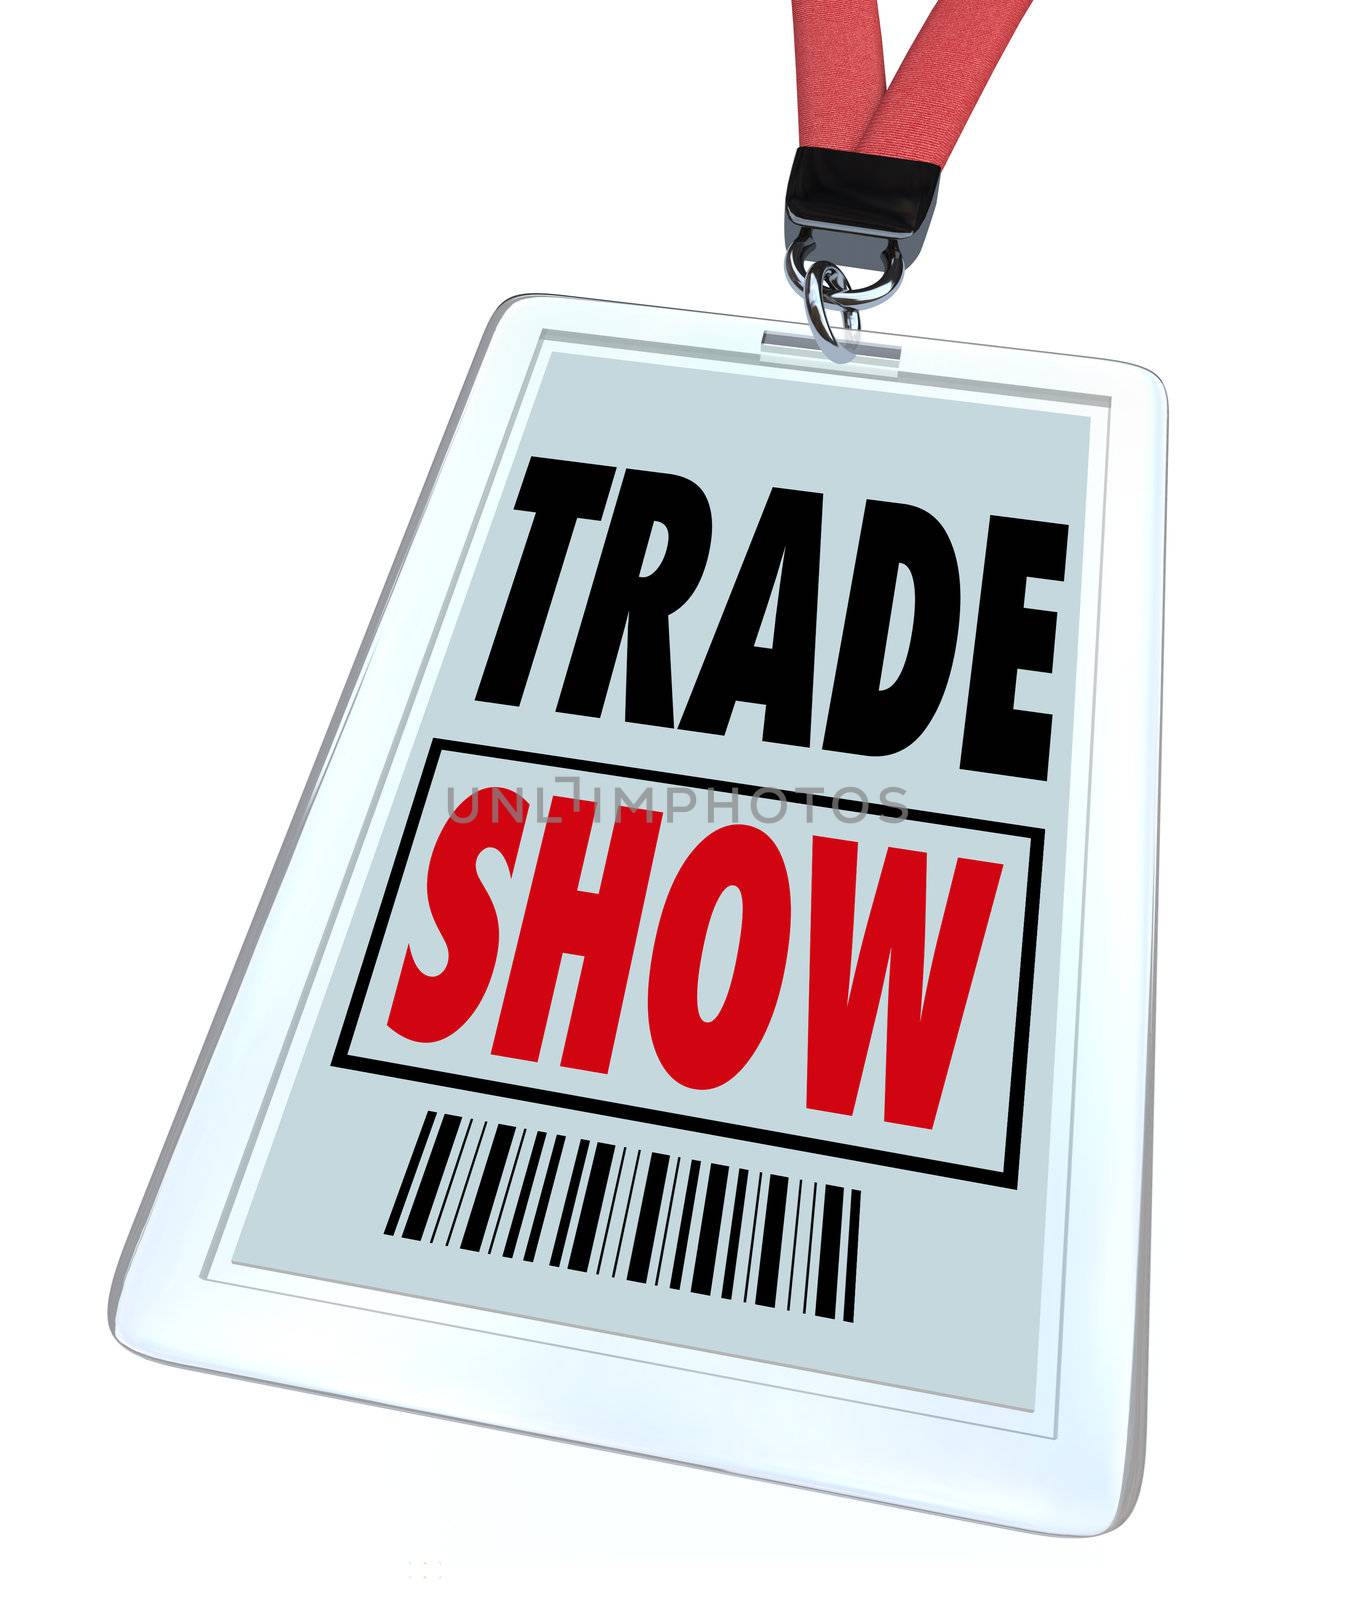 A badge and lanyard reading Trade Show for attendees to wear as a pass to get into a conference, convention or other large event